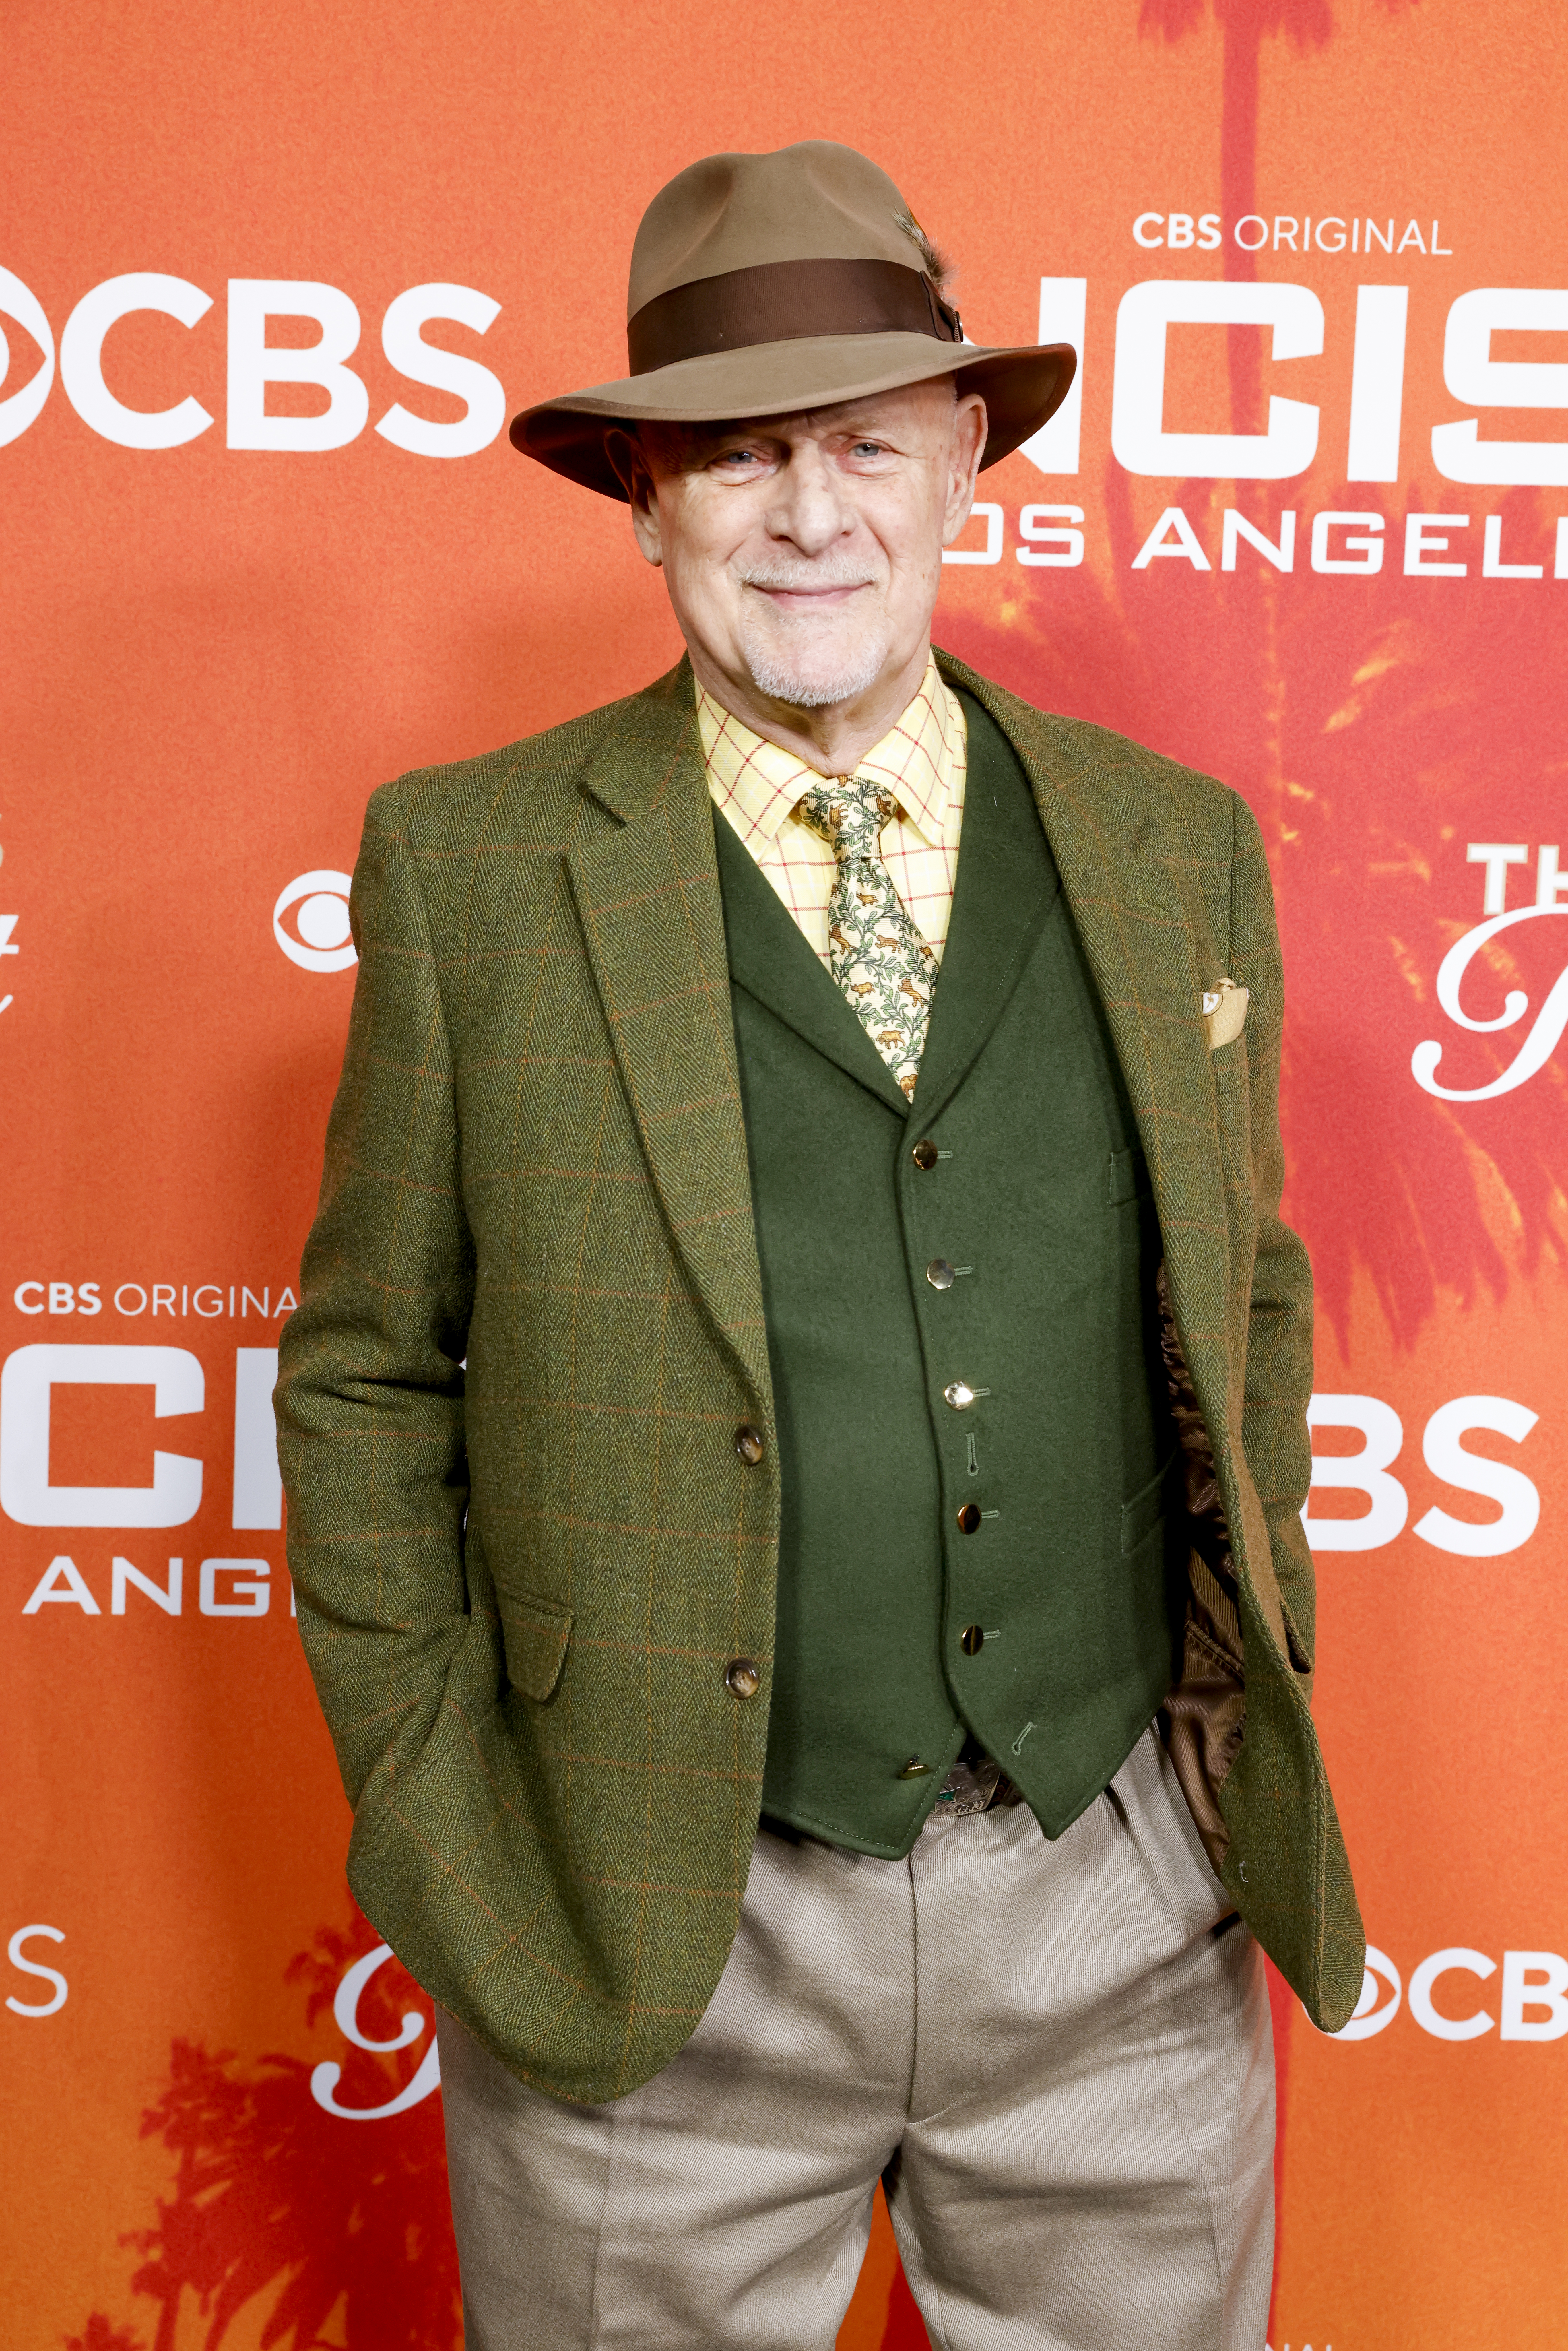 Gerald McRaney arrives at the "NCIS: LOS ANGELES" wrap party, on March 3, 2023, in Los Angeles, California. | Source: Getty Images